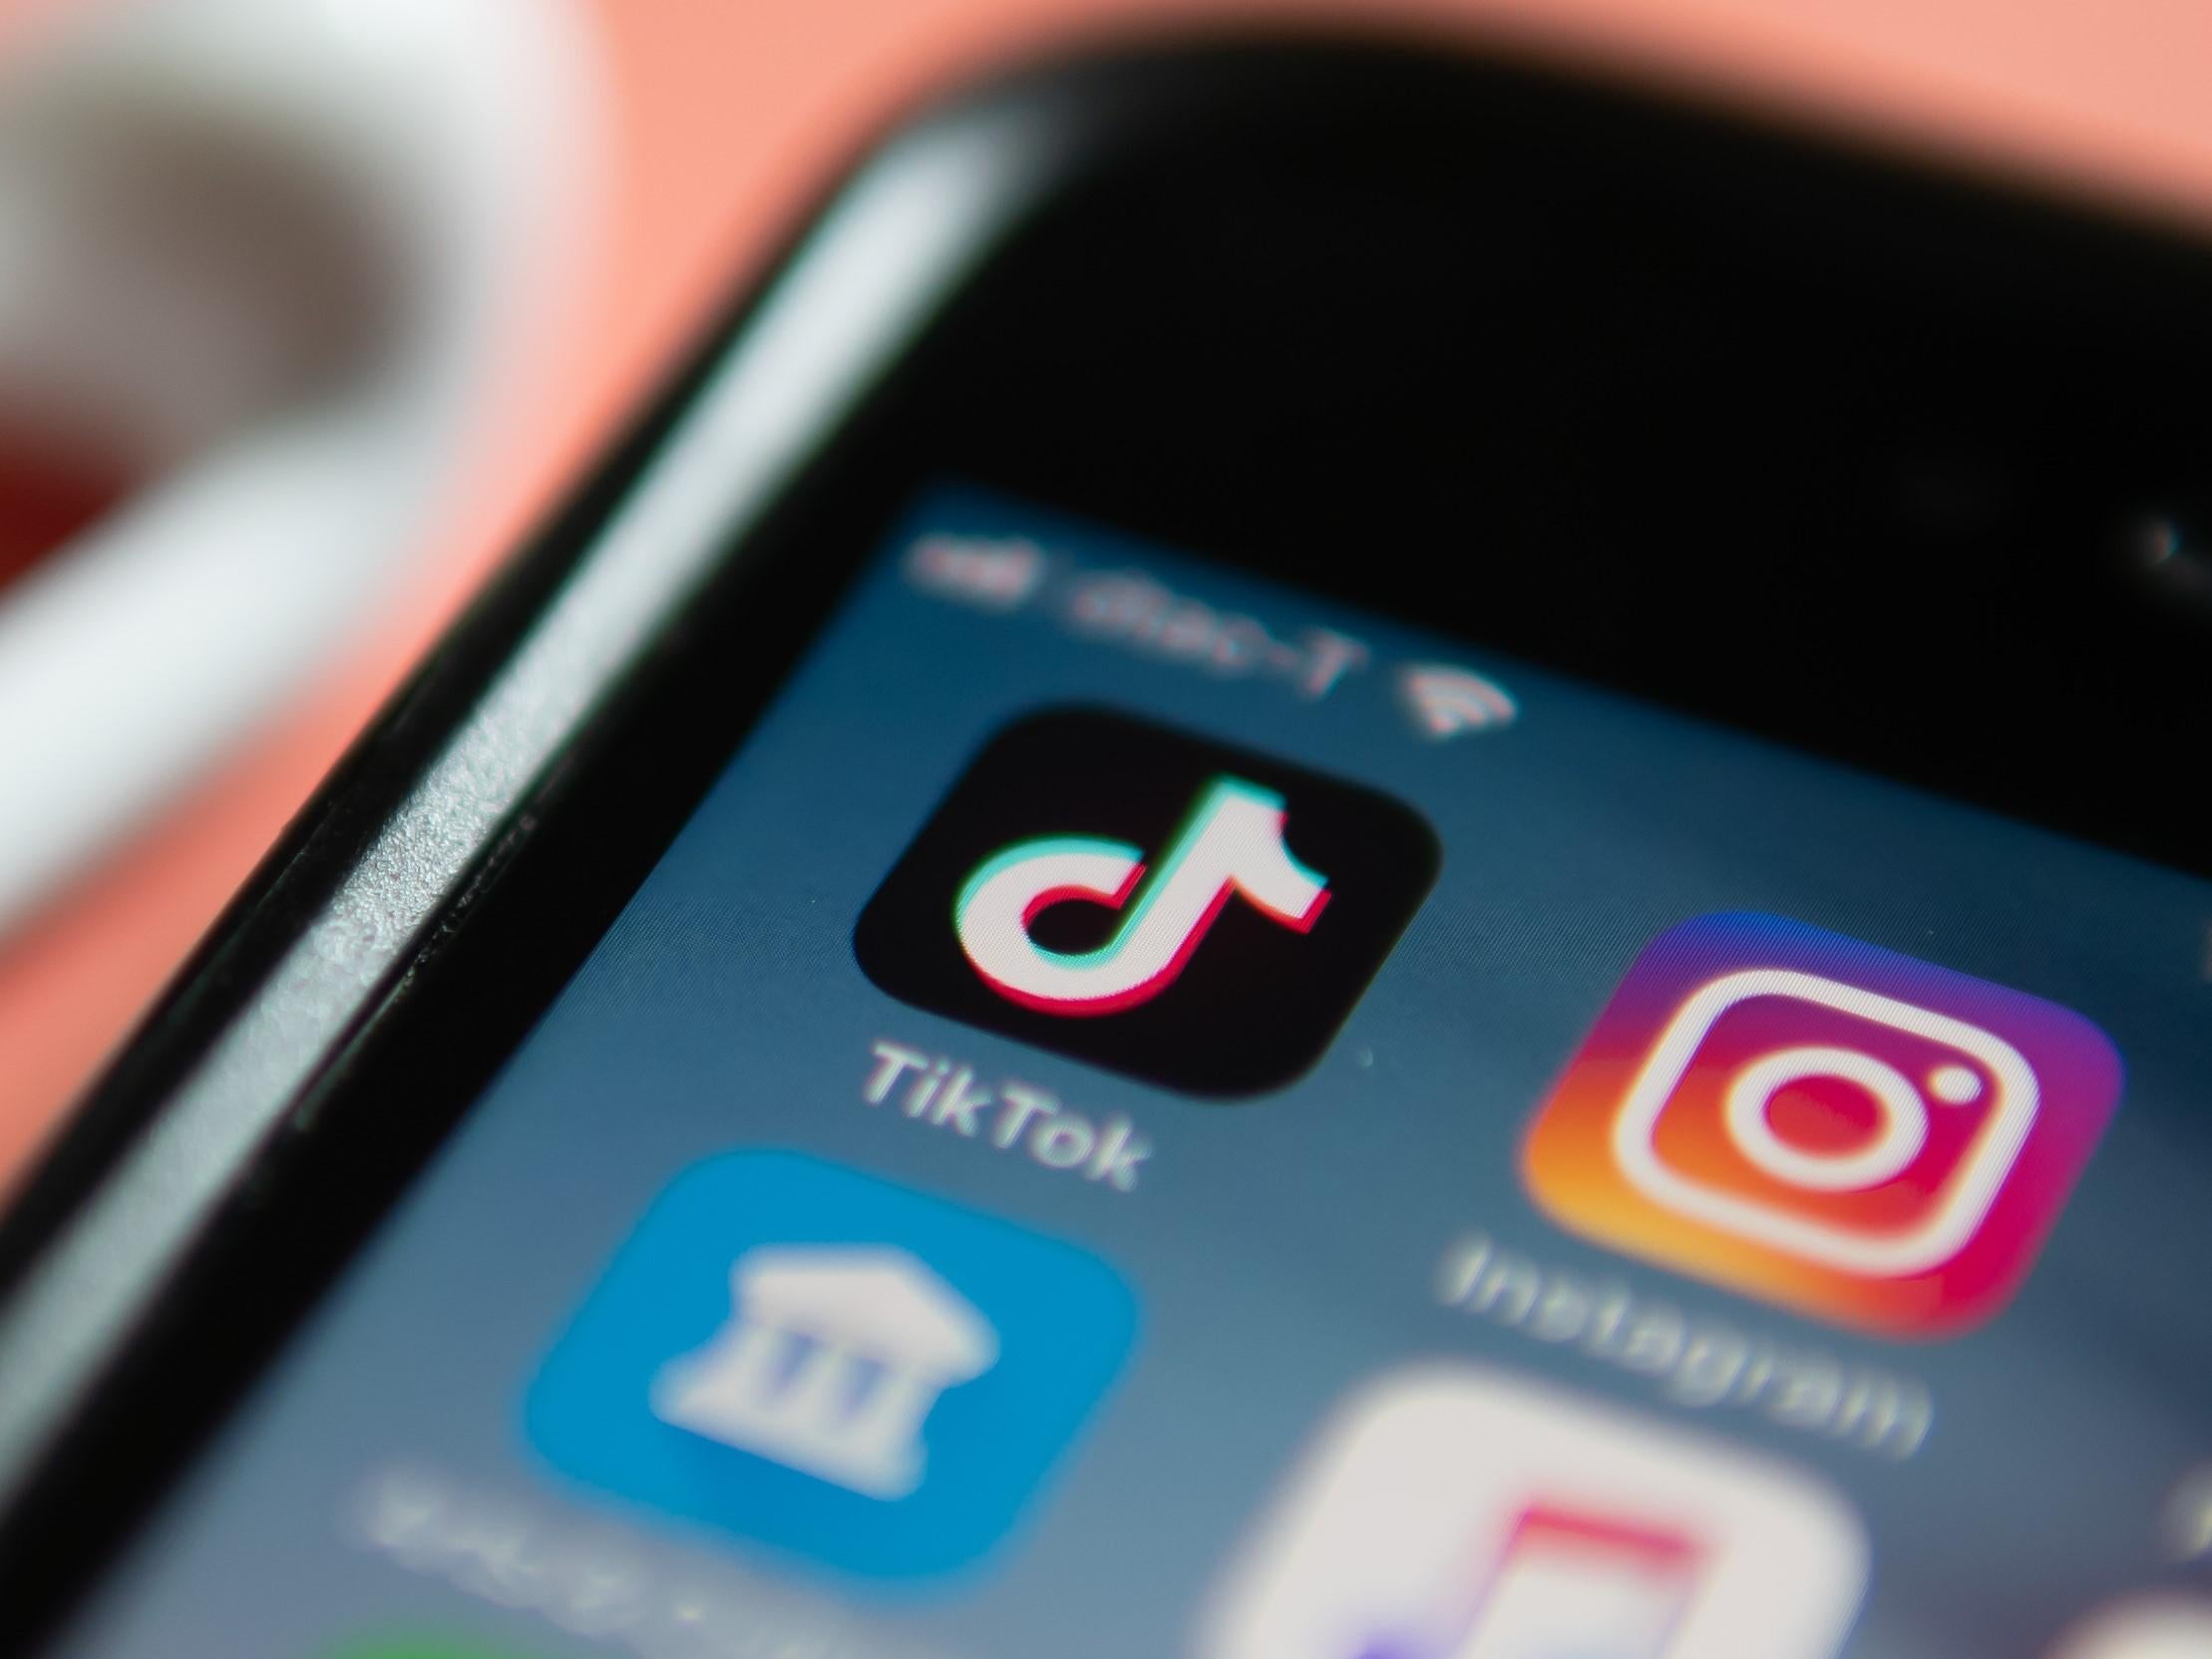 TikTok has been downloaded more than 1.5 billion times since launching in 2016